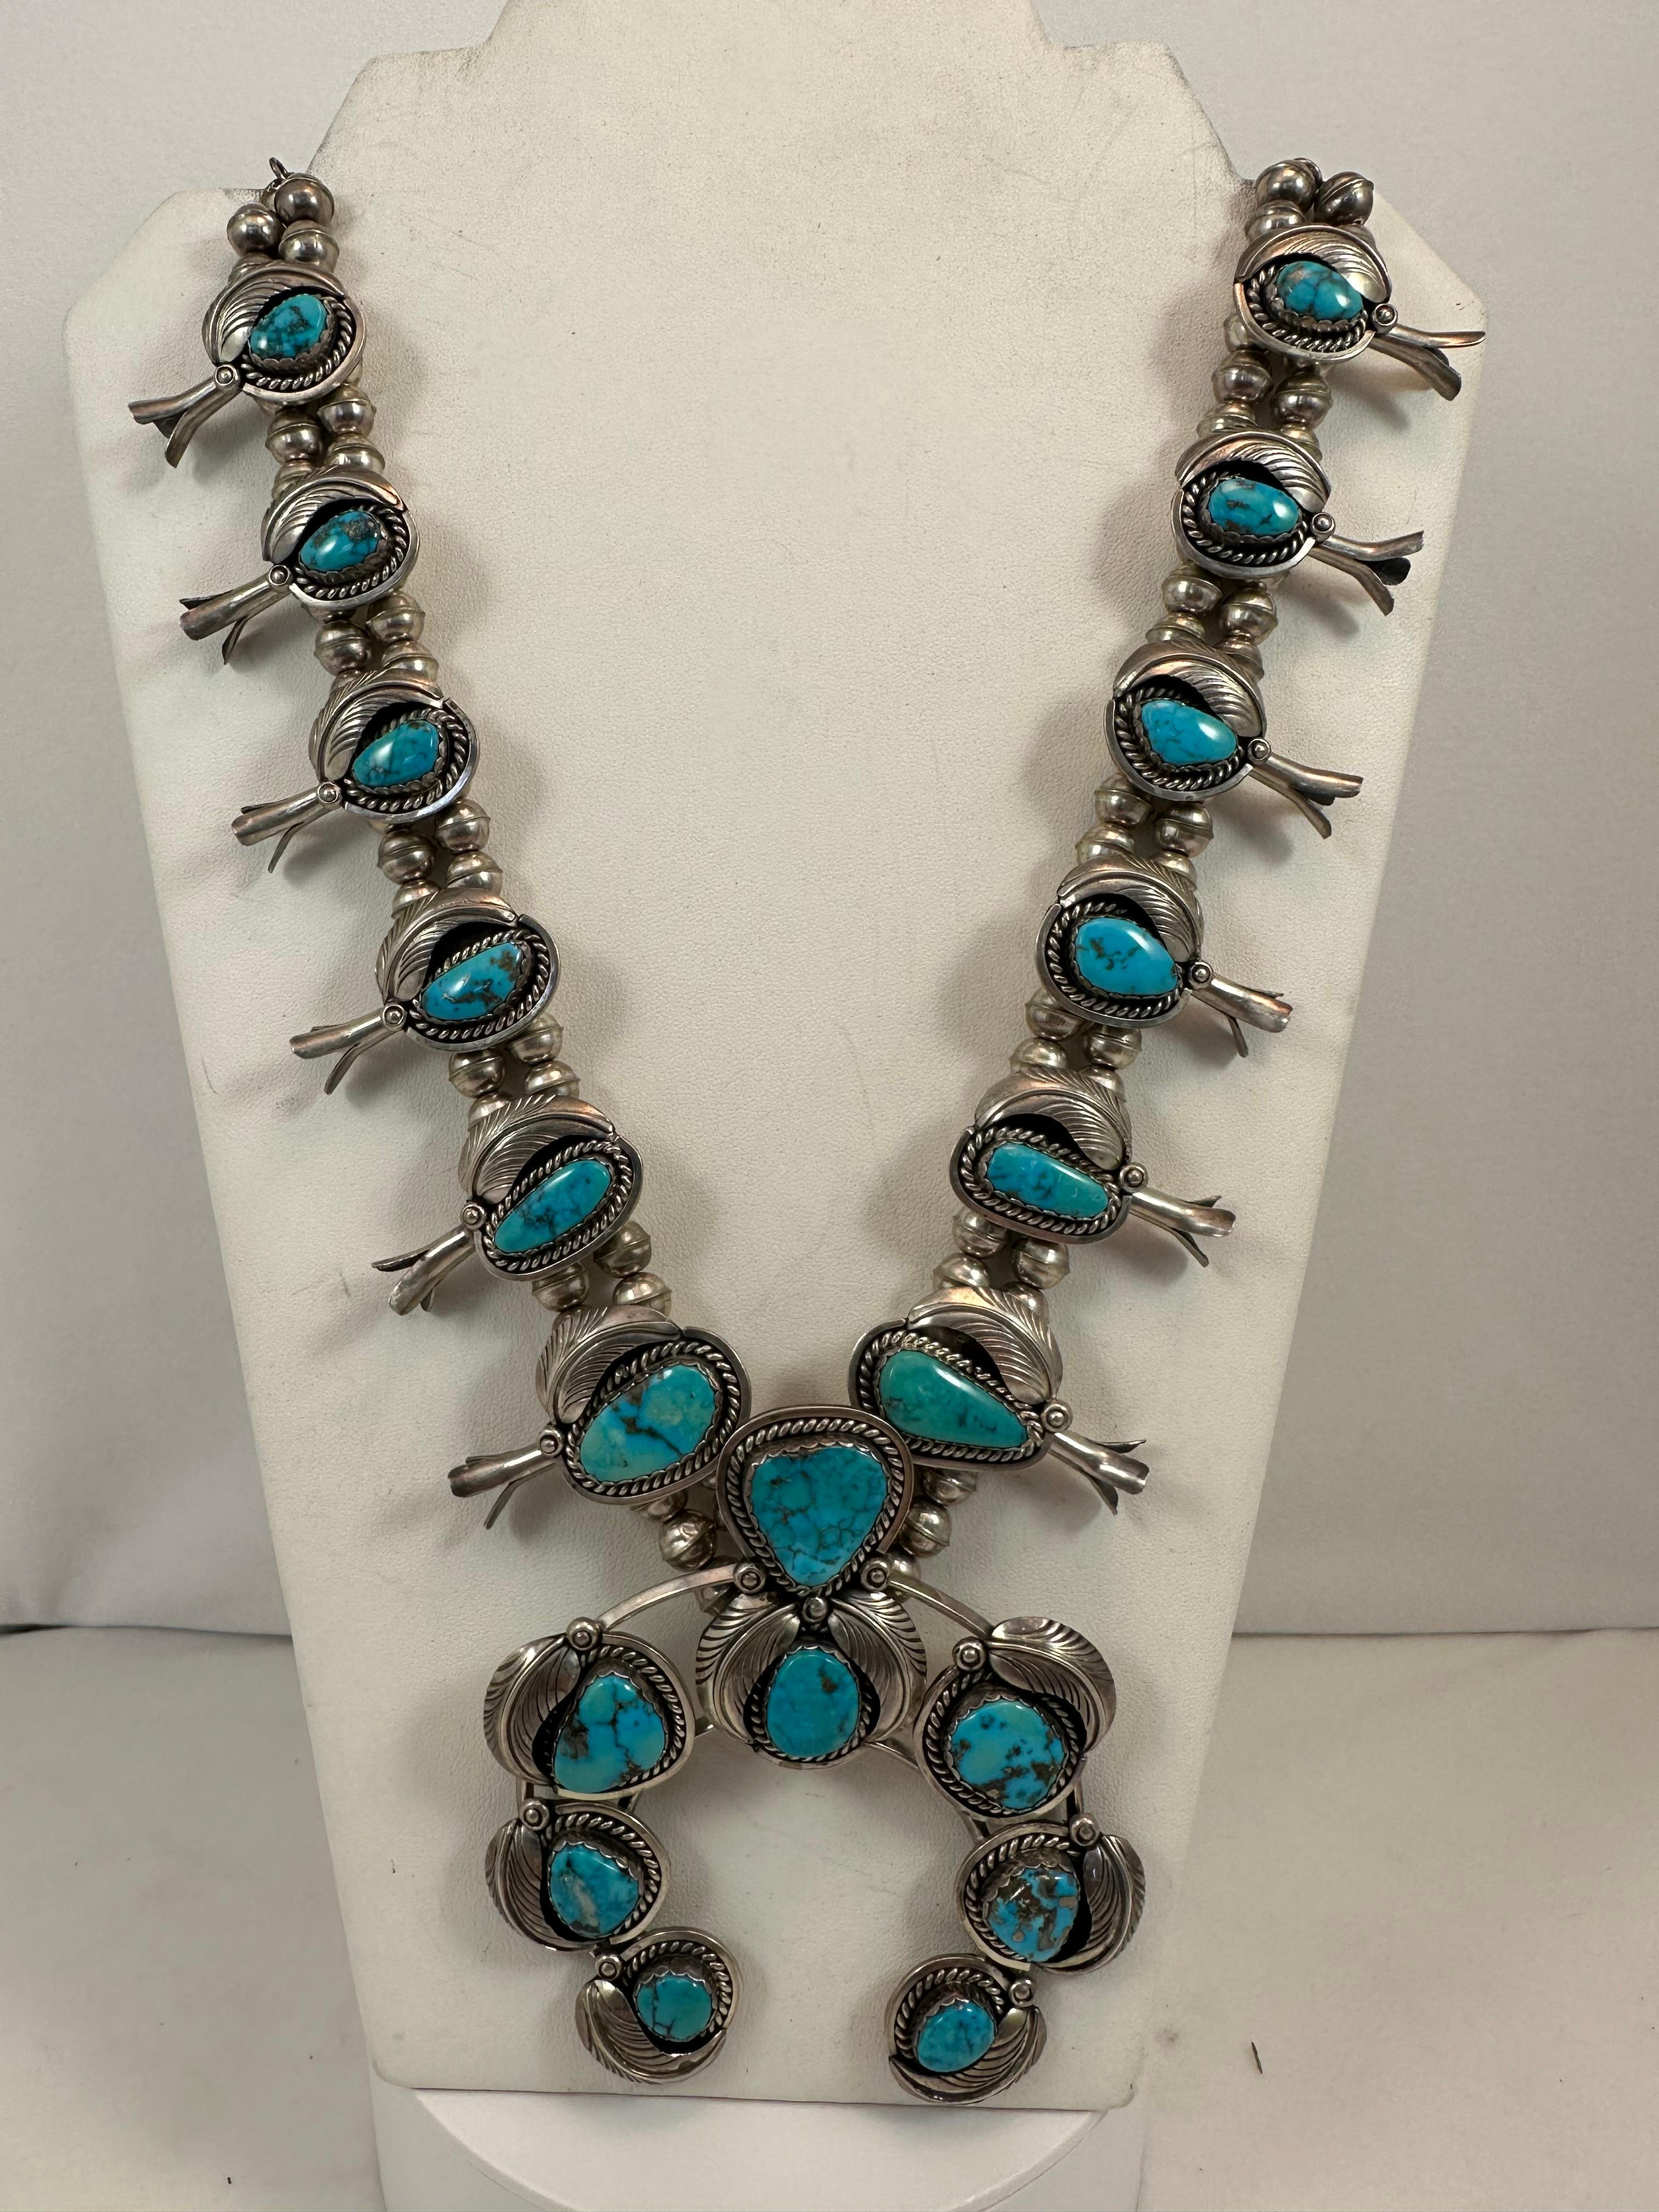 OLD PAWN
Handmade by Navajo Artist Don Platero ~ Sterling Silver .925 ~ 122 carats of Morenci Turquoise Squash Blossom. 
The Squash Blossom measures approx. length 32